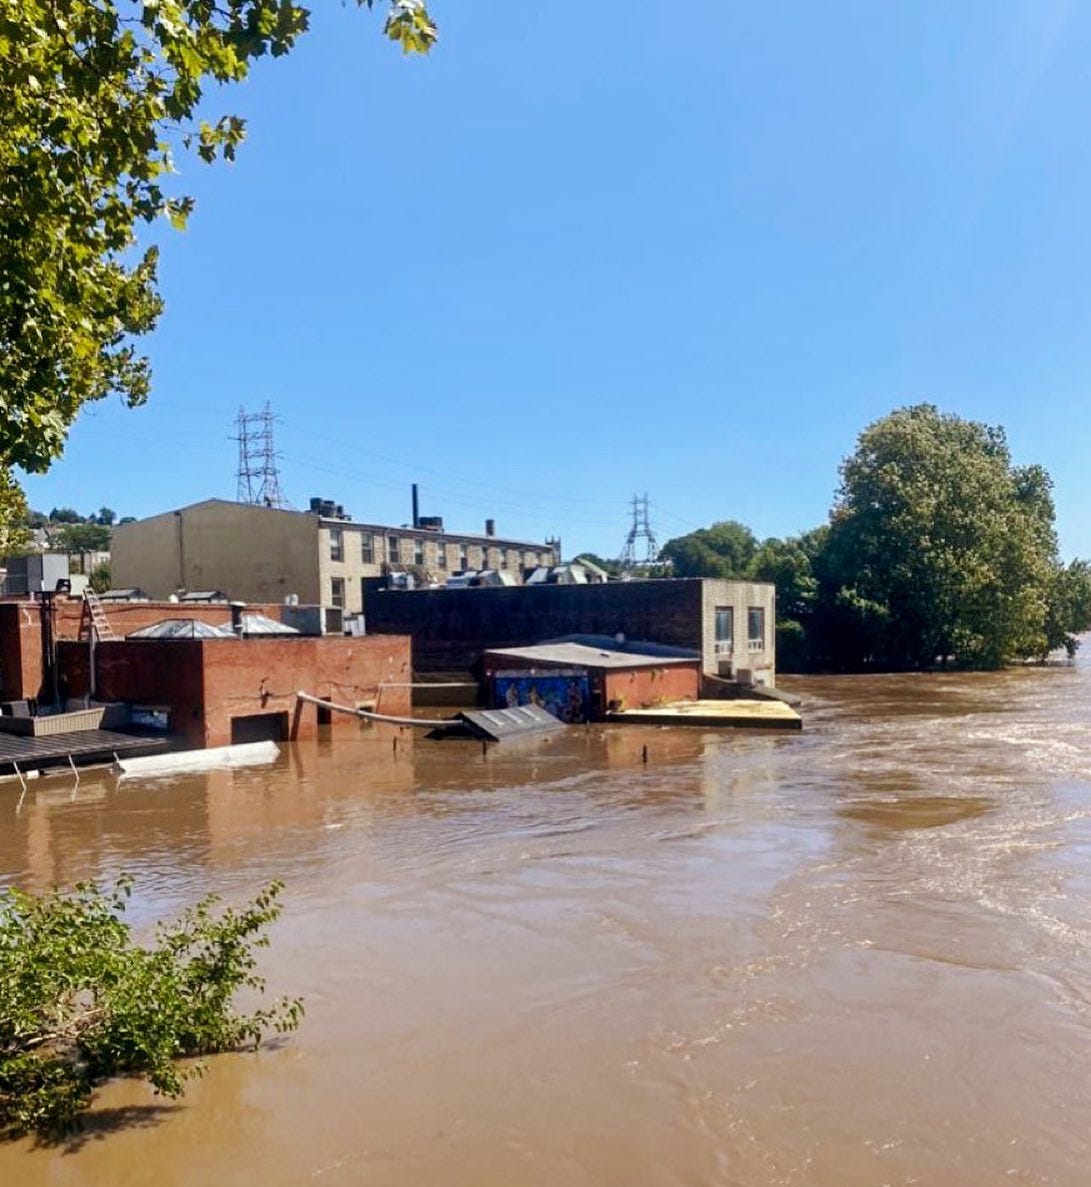 Remnants of Hurricane Ida brought a Schuylkill River surge that near-completely engulfed Manayunk Brewing Restaurant and Bar on Sept. 2, 2021, in northwest Philadelphia. The brewpub, having made hundreds of its own craft beers since 1996, reopened after six months of repairs as a restaurant and bar.